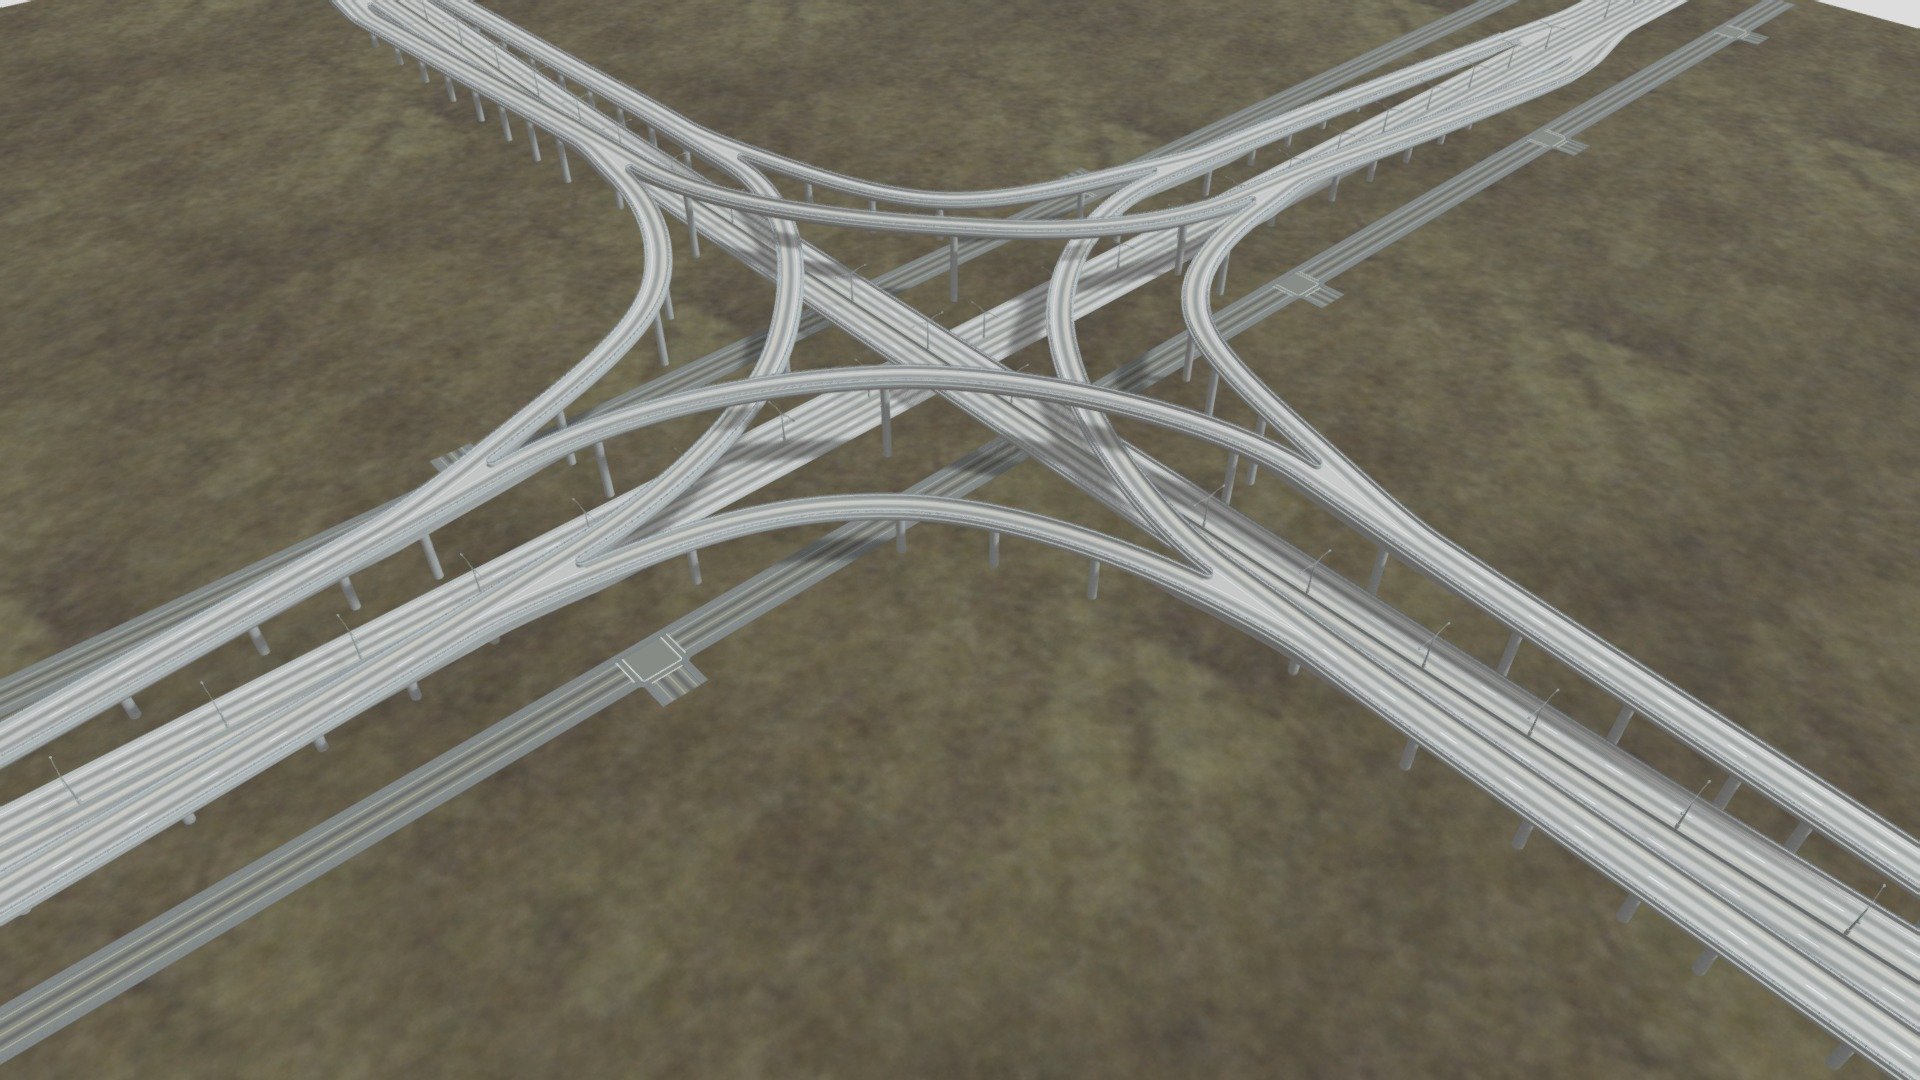 My first version of a stack interchange I modelled for this project 3d model